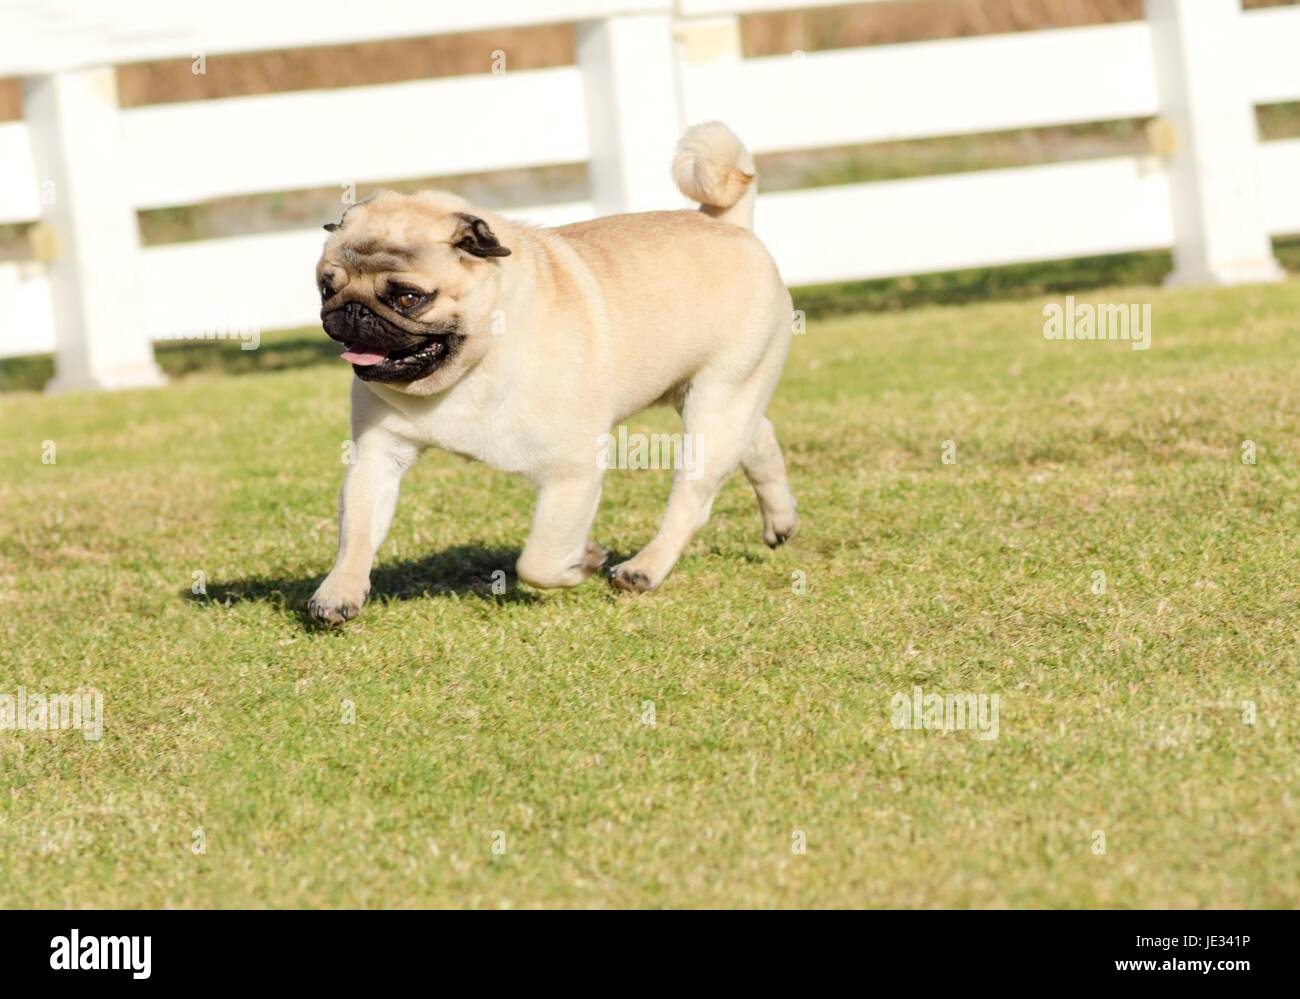 A small, young, beautiful, fawn Pug with a wrinkly short muzzled face running on the lawn looking playful and cheerful. The chinese pug is a happy dog with deep wrinkles, round head and curled tail over the back. Stock Photo